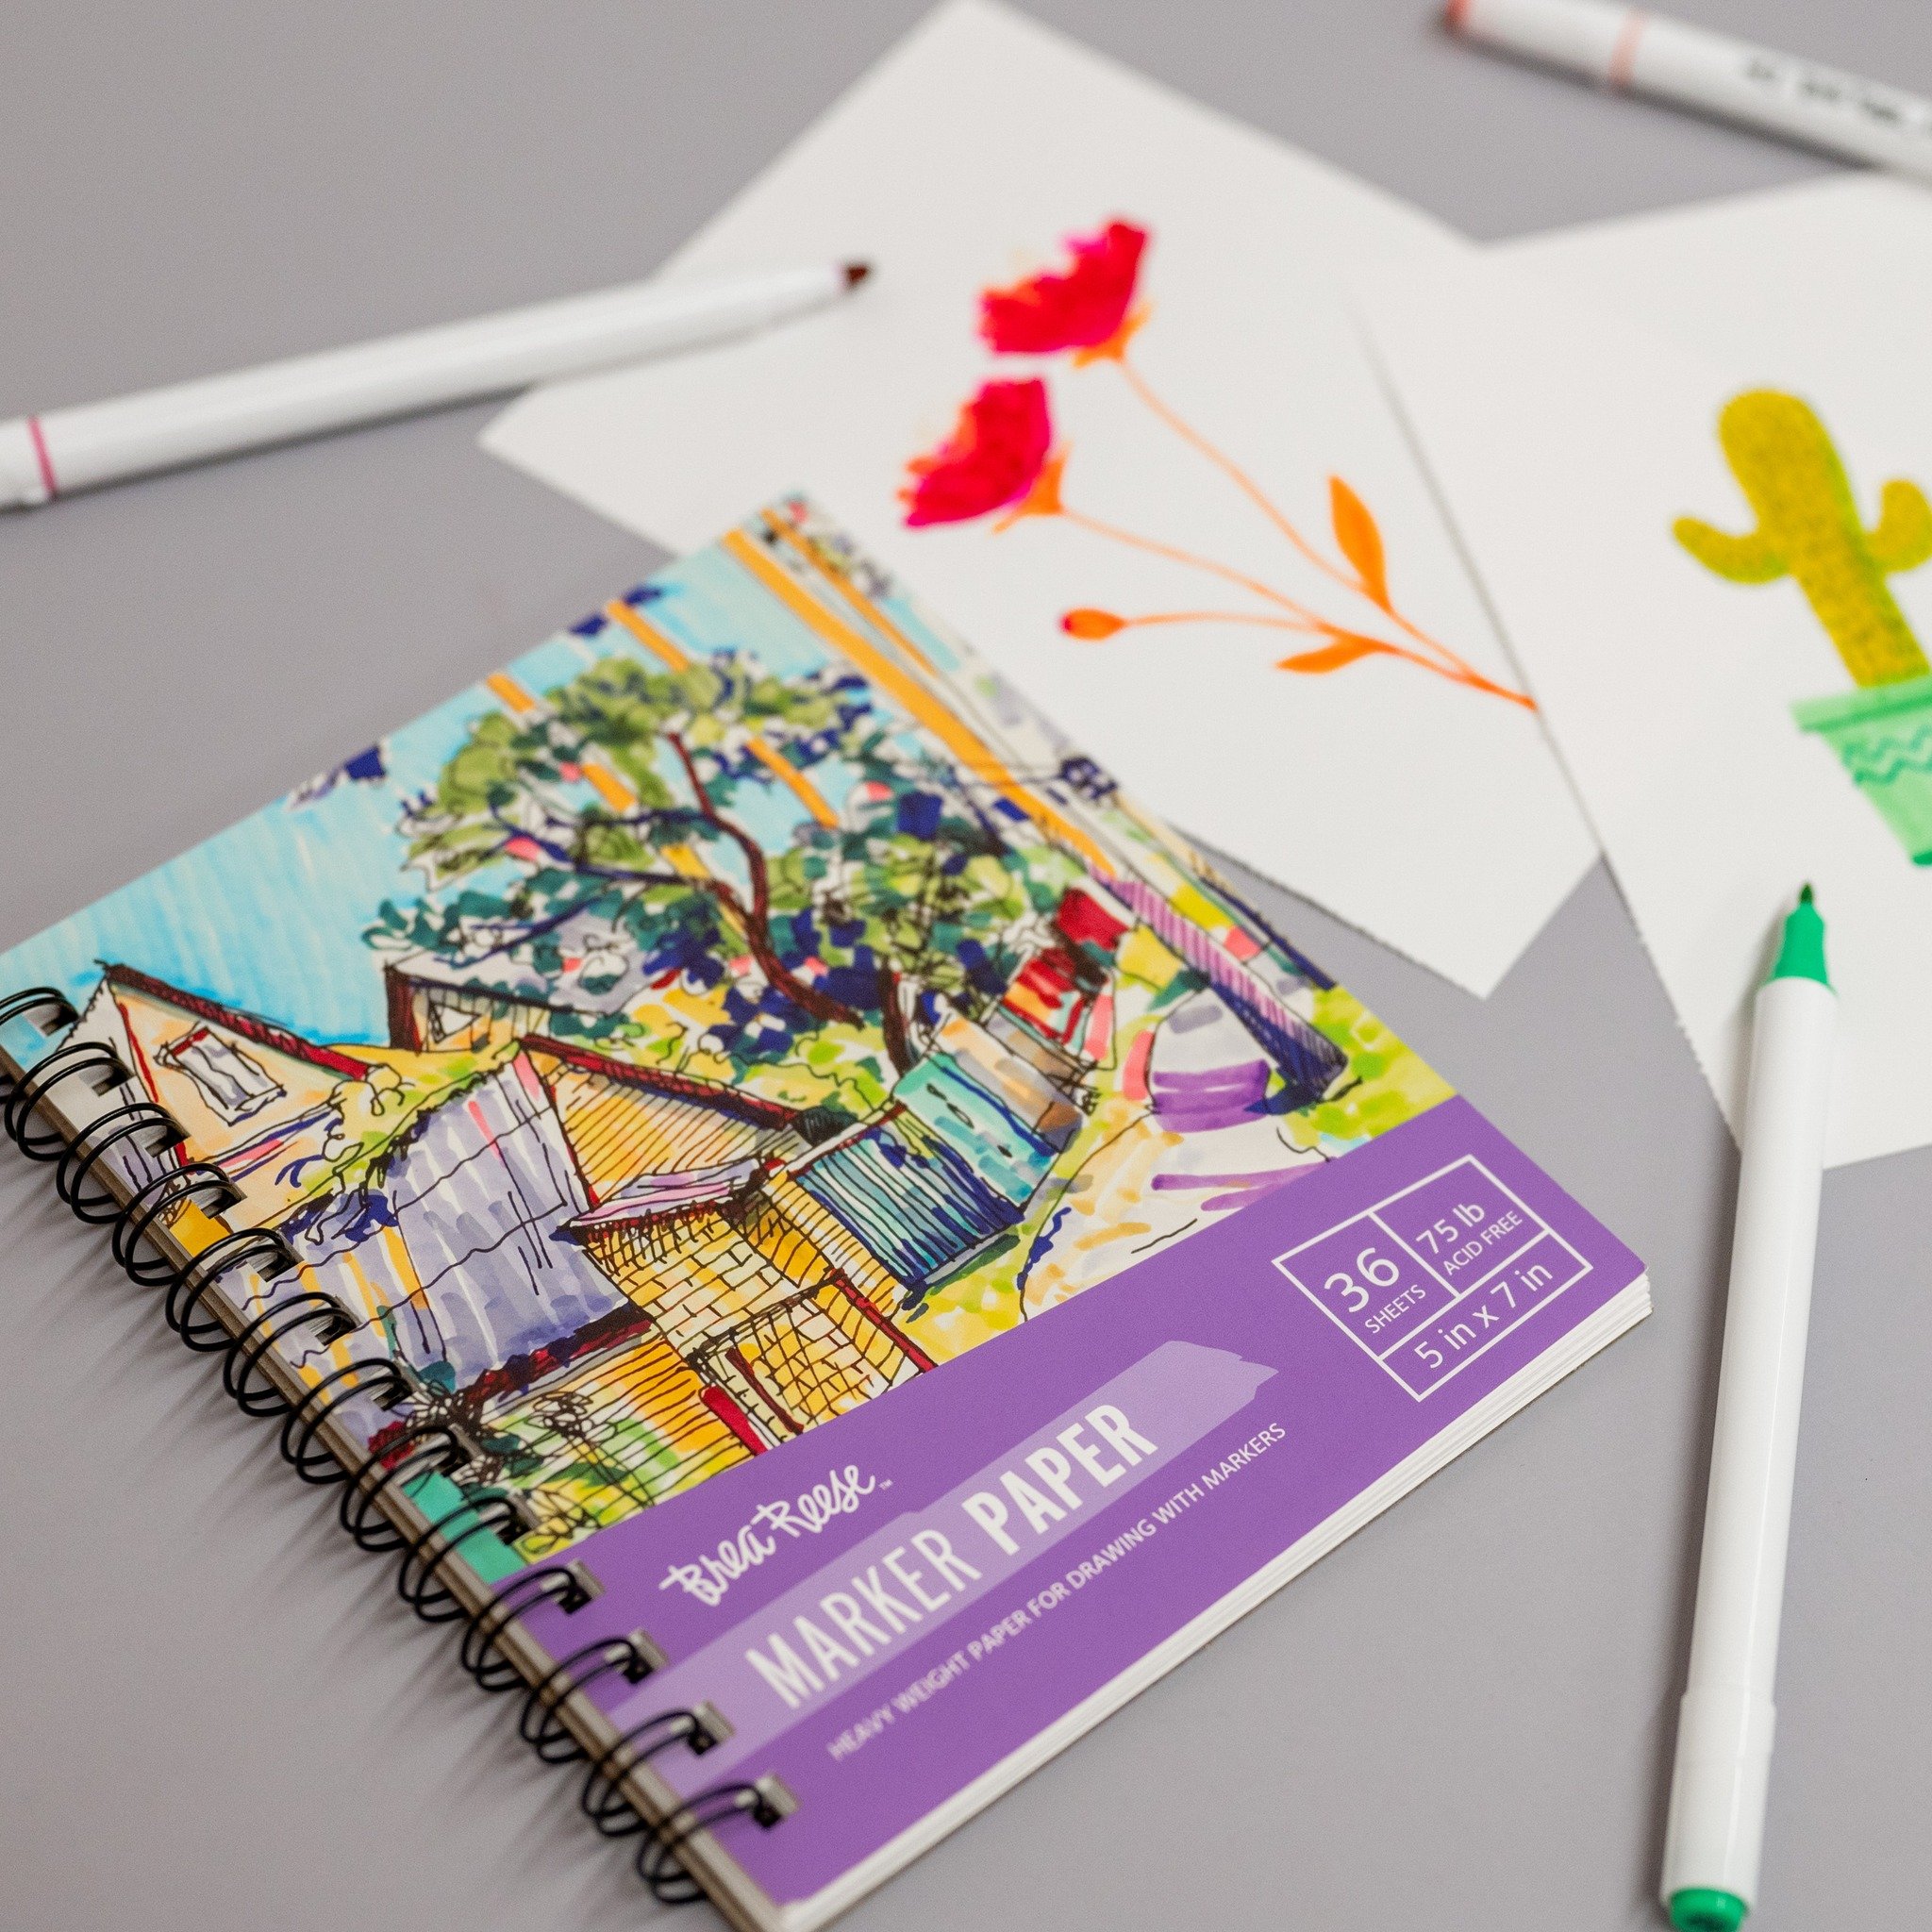 Want to achieve flawless results with your markers? Try out our marker paper! Its heavyweight design and smooth surface allows for a seamless blending experience. Visit @officedepot to get yours today! #TipTuesday #markers #markerart